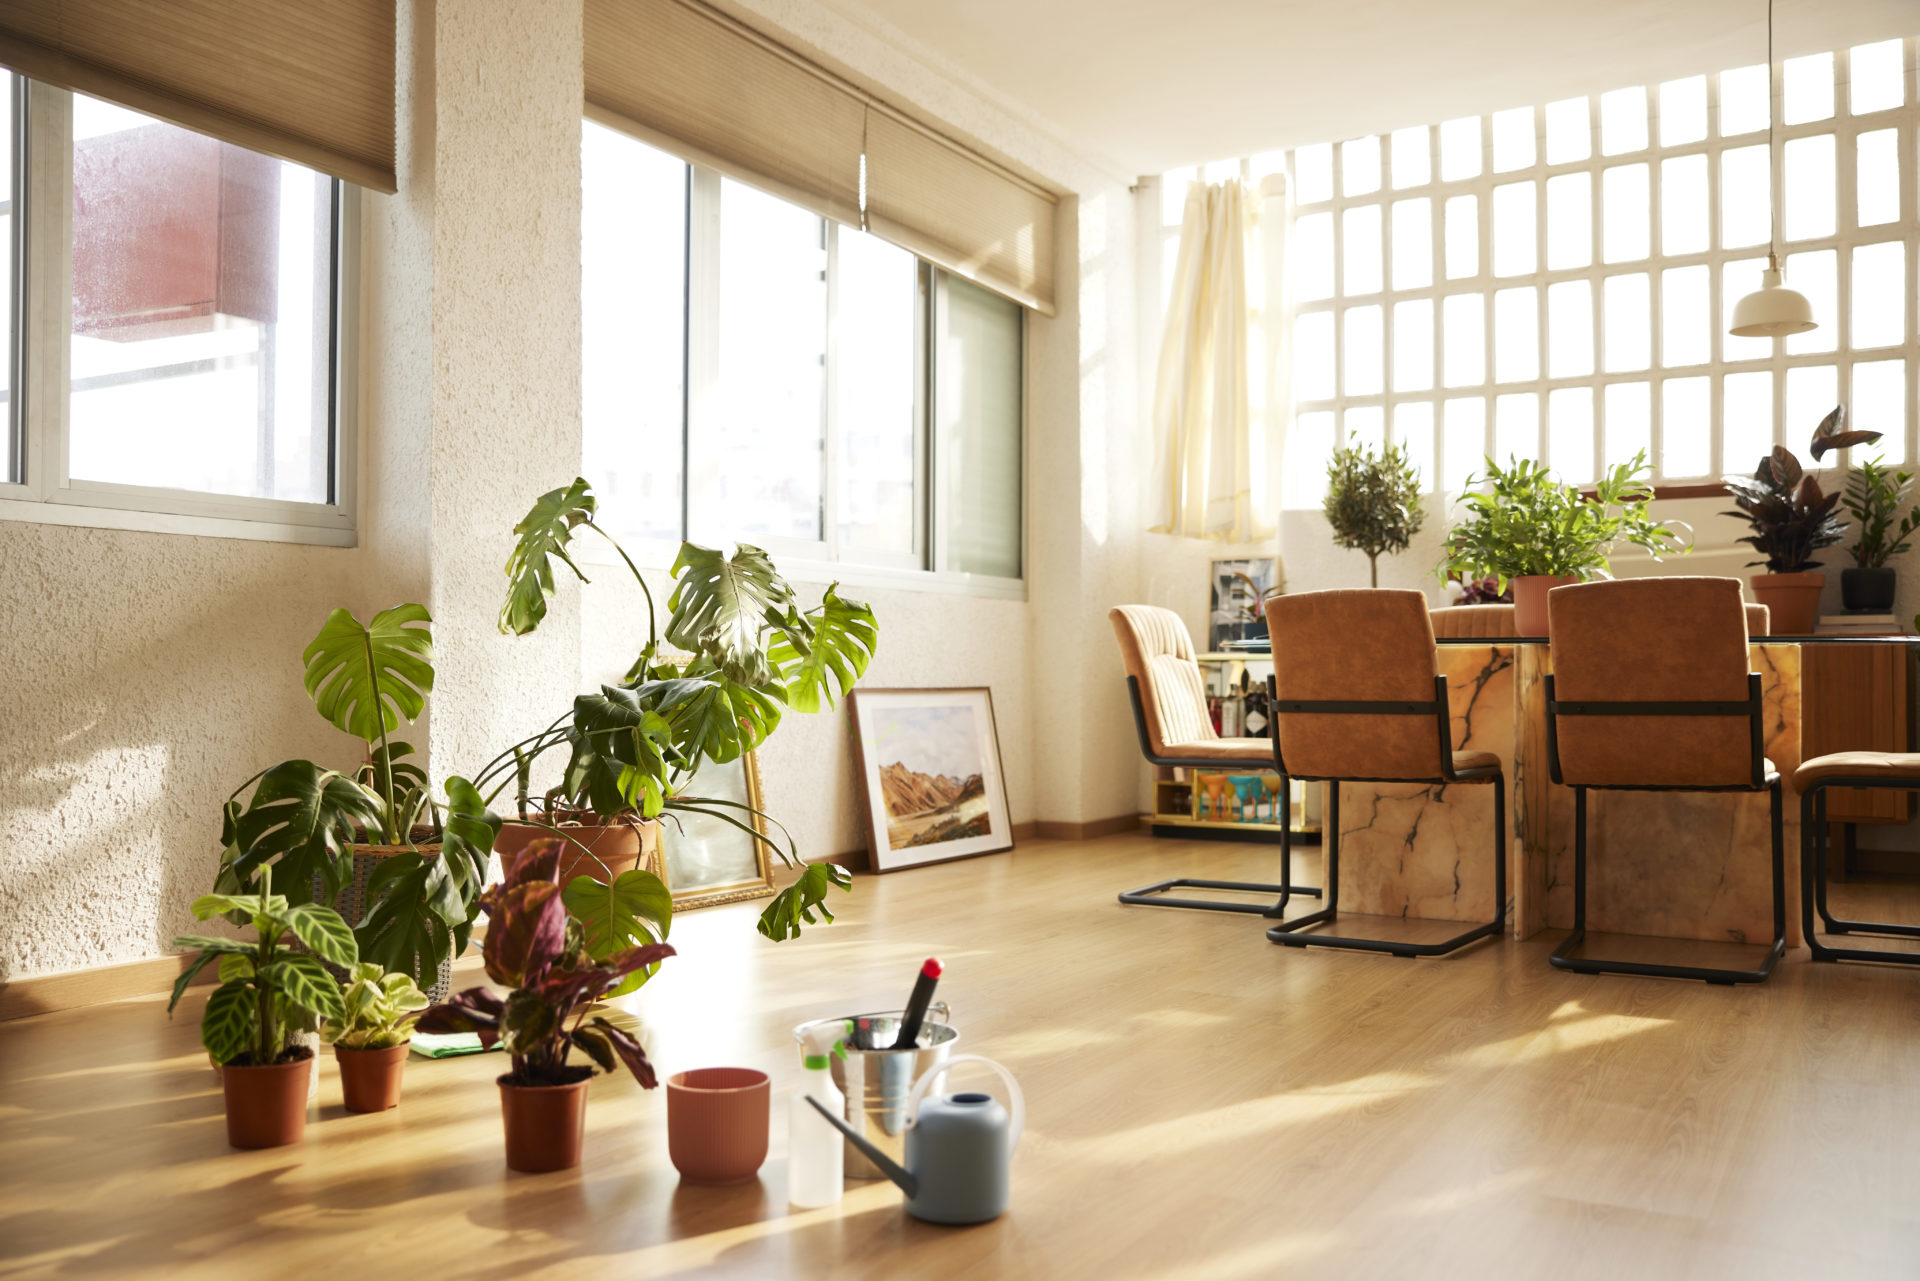 Potted Plants In Domestic Room